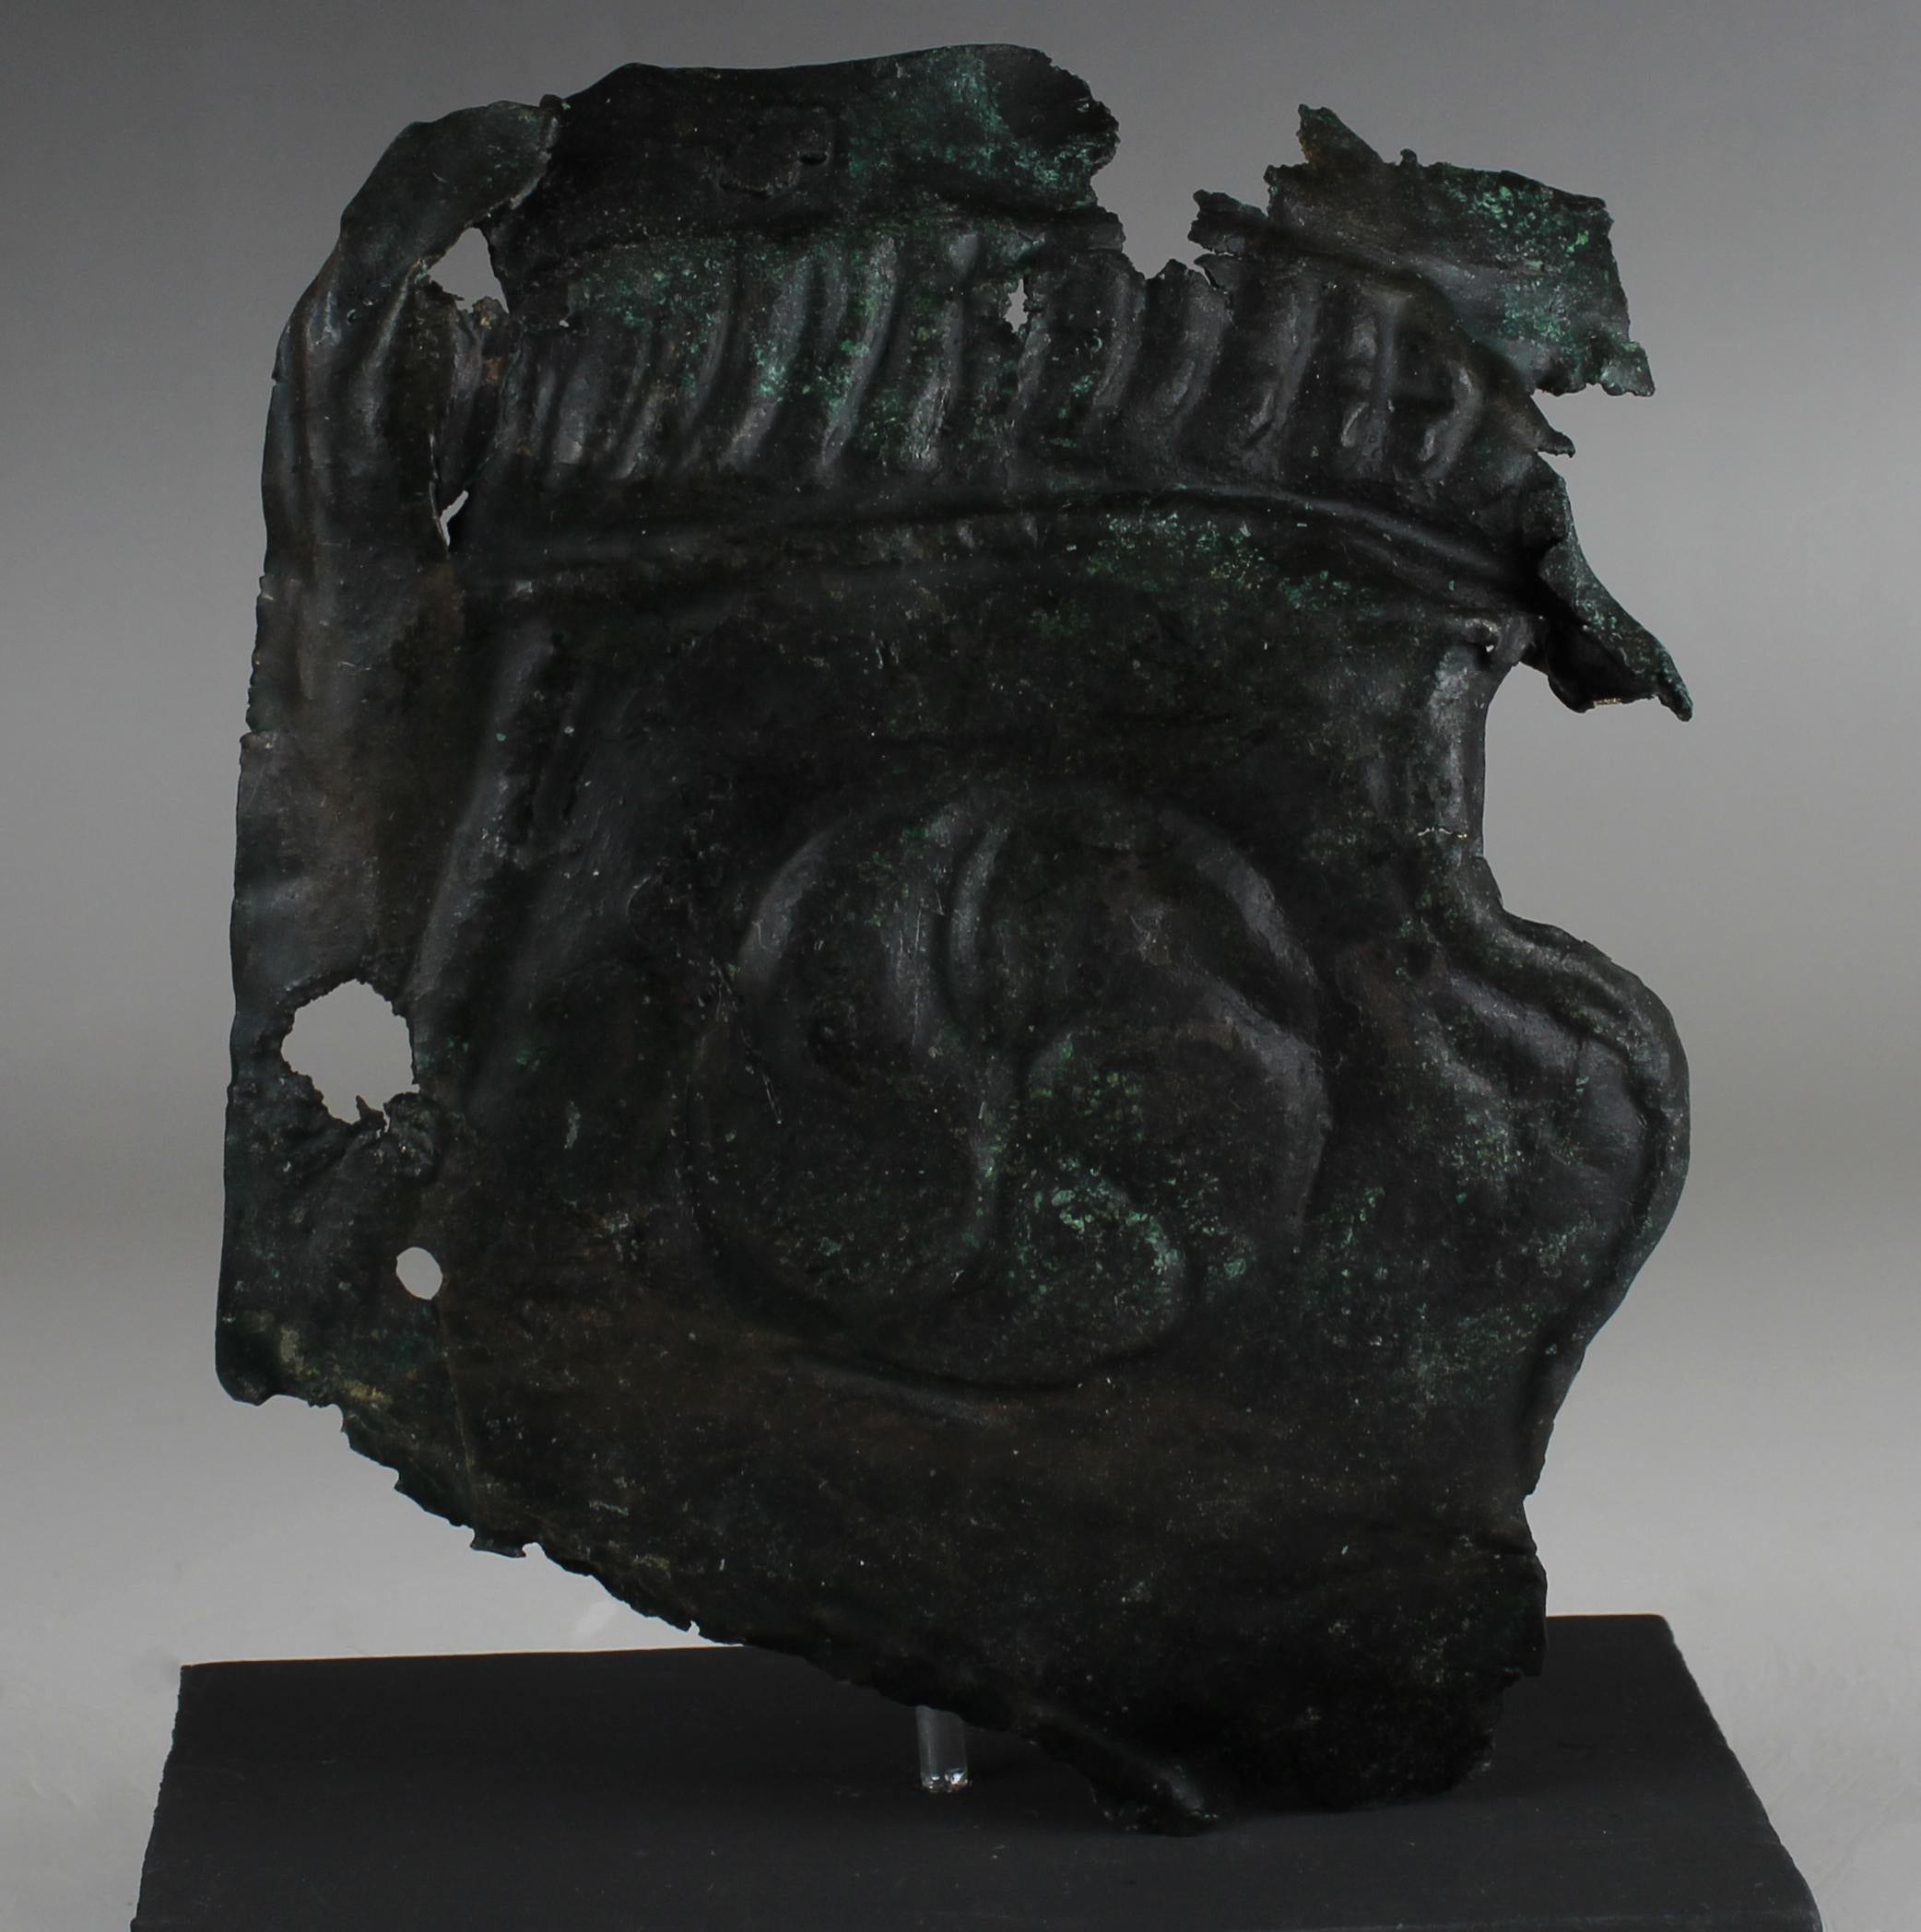 ITEM: Military cheek piece of a helmet fragment with shield ornament
MATERIAL: Bronze
CULTURE: Roman
PERIOD: 3rd Century A.D
DIMENSIONS: 130 mm x 110 mm
CONDITION: Good condition
PROVENANCE: Ex Alison Barker private collection, a retired London